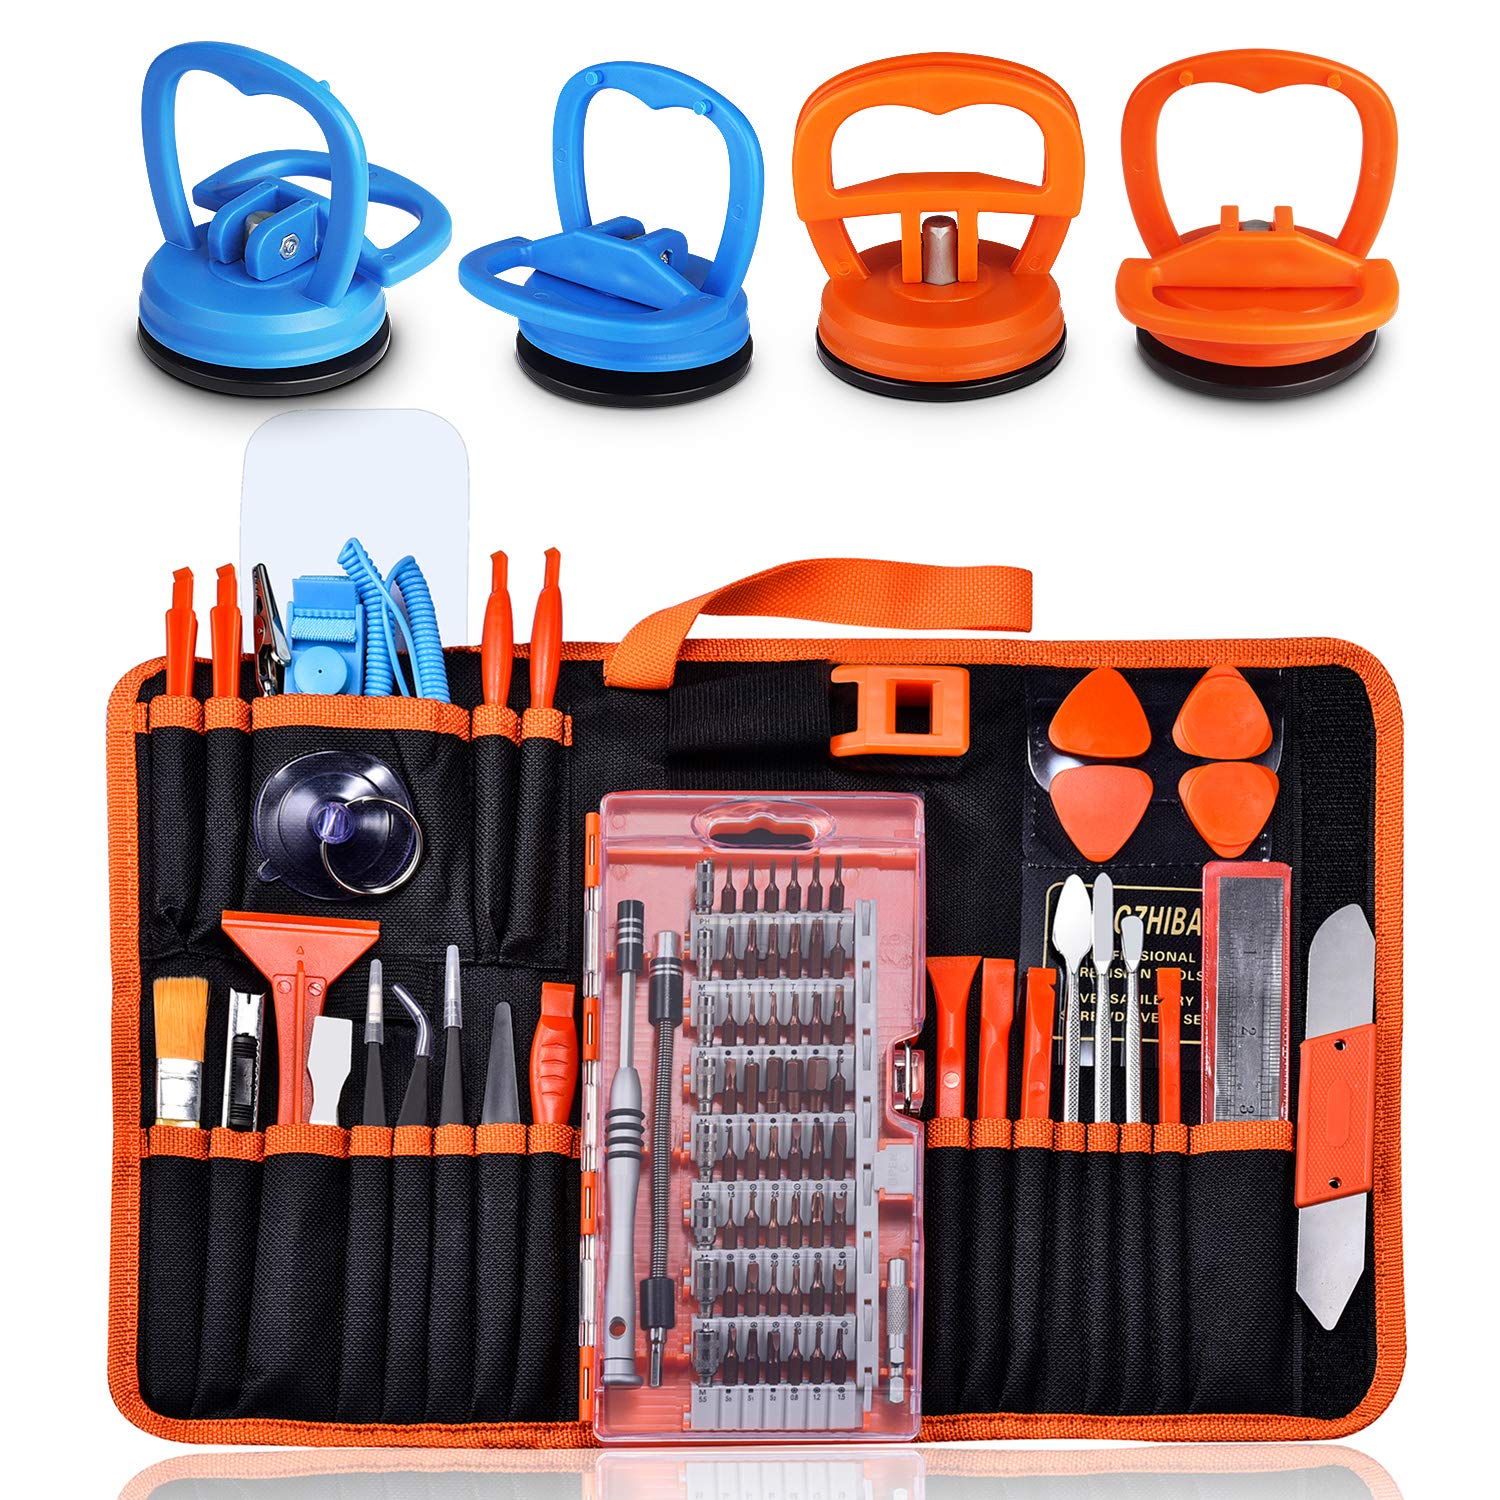 GANGZHIBAO 90pcs Electronics Repair Tool Kit Professional+4pcs suction cup for MacBook iMac,iPhone,PC,iPad,Tablet,LCD Screen Opening Tool